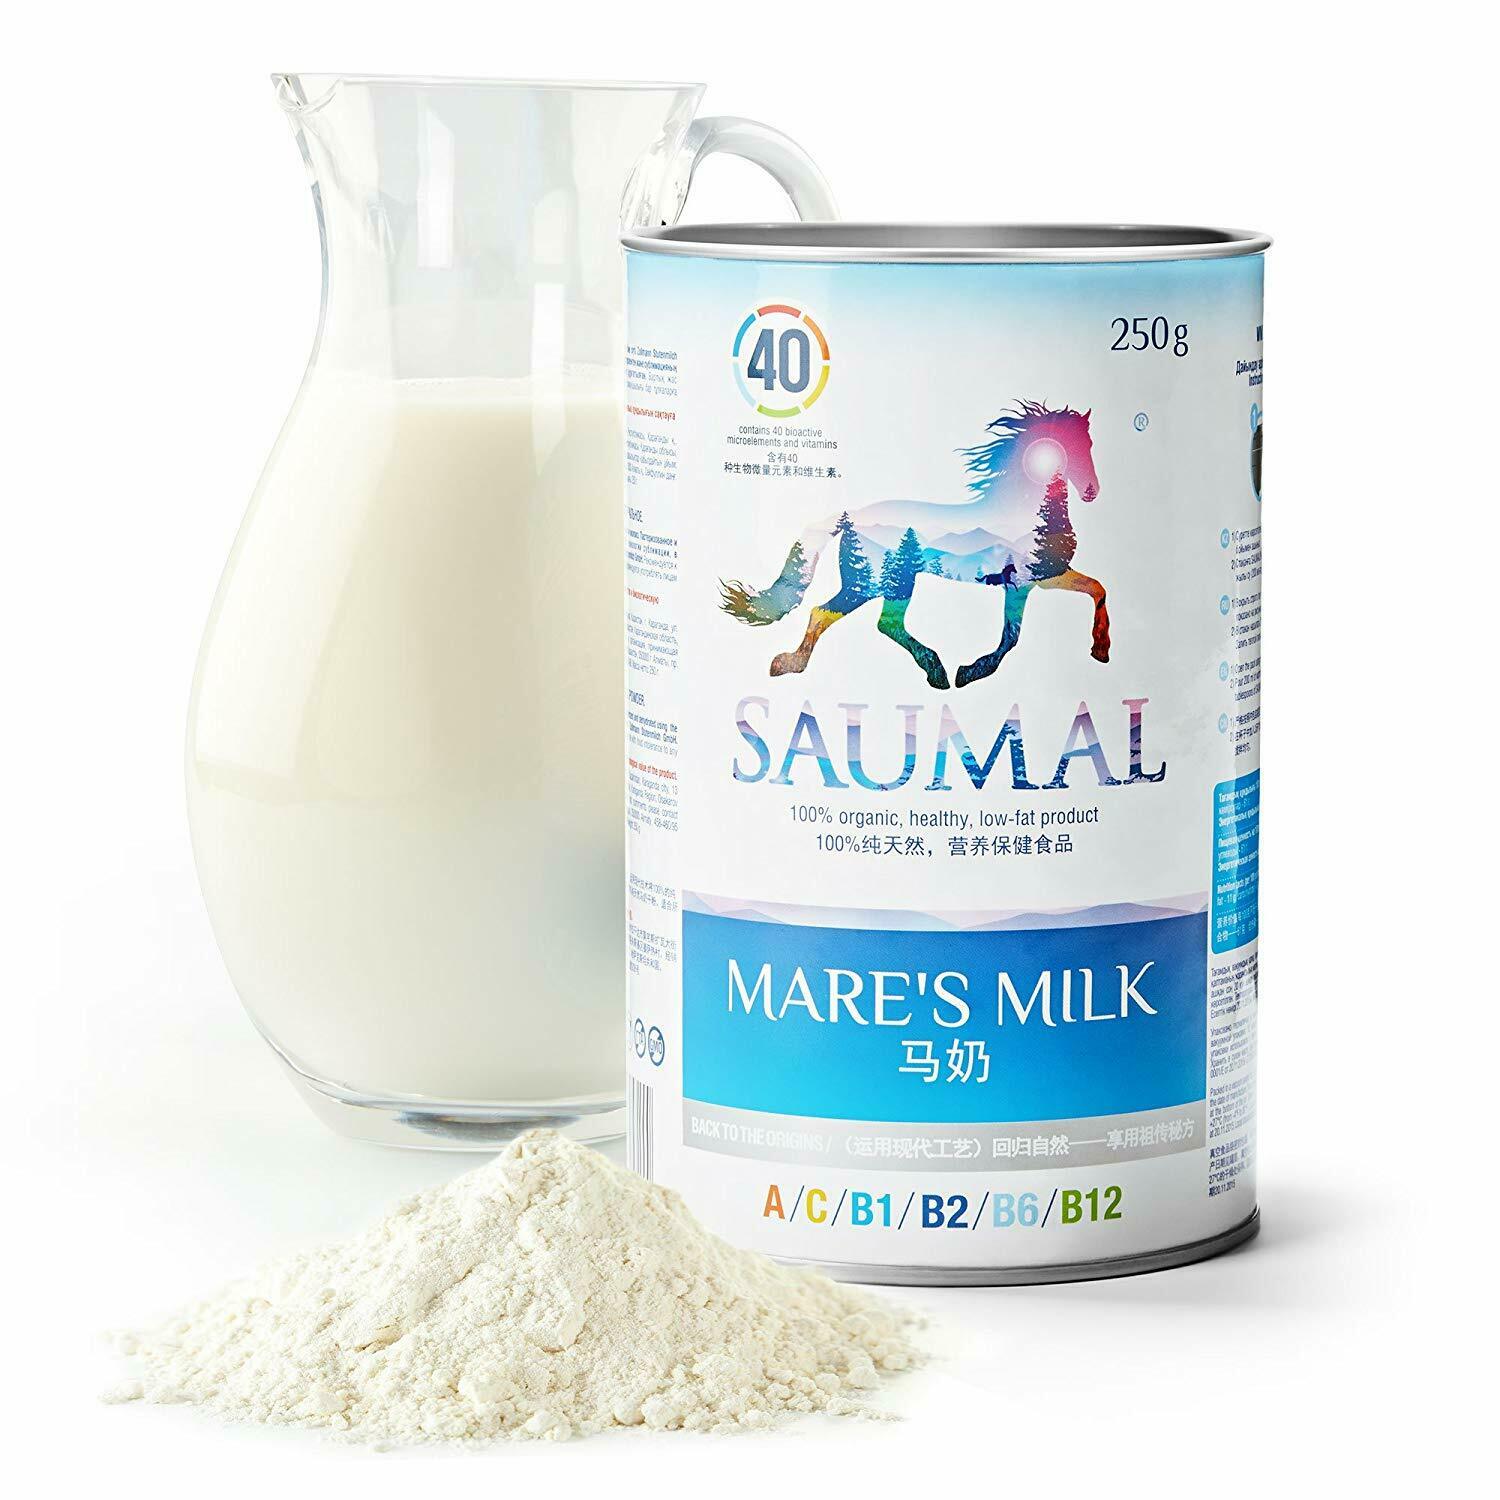 Mare’s Milk From The Heart Of Kazakh Steppes. 100% Organic Powder, 250 G (8,8oz)